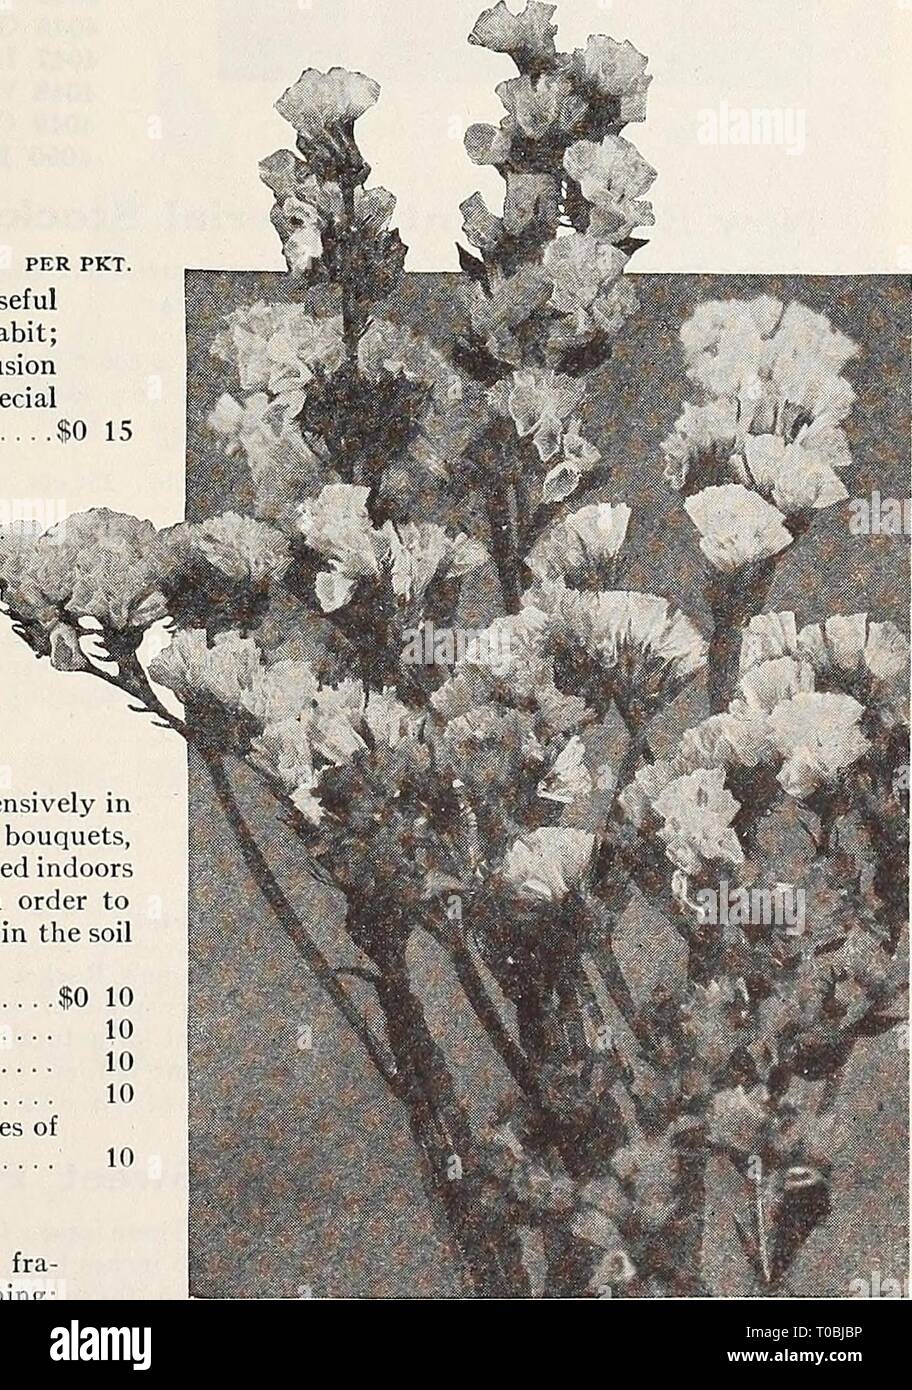 Dreer's garden book 1932 (1932) Dreer's garden book 1932 dreersgardenbook1932henr Year: 1932  111 SchizatlthllS (Butterfly or Fringe Flower) This is one of the airiest and daintiest flowers imaginable, especially adapted to bordering beds of taller flowers and those of a heavier growth. The seeds germinate quickly and come into bloom in a few weeks from sowing. The florescence is such as to completely obscure the foliage, making the plant a veritable pyramid of the most delicate and charming bloom. The Schizanthus make admirable pot plants for the house in late winter and early spring. For thi Stock Photo